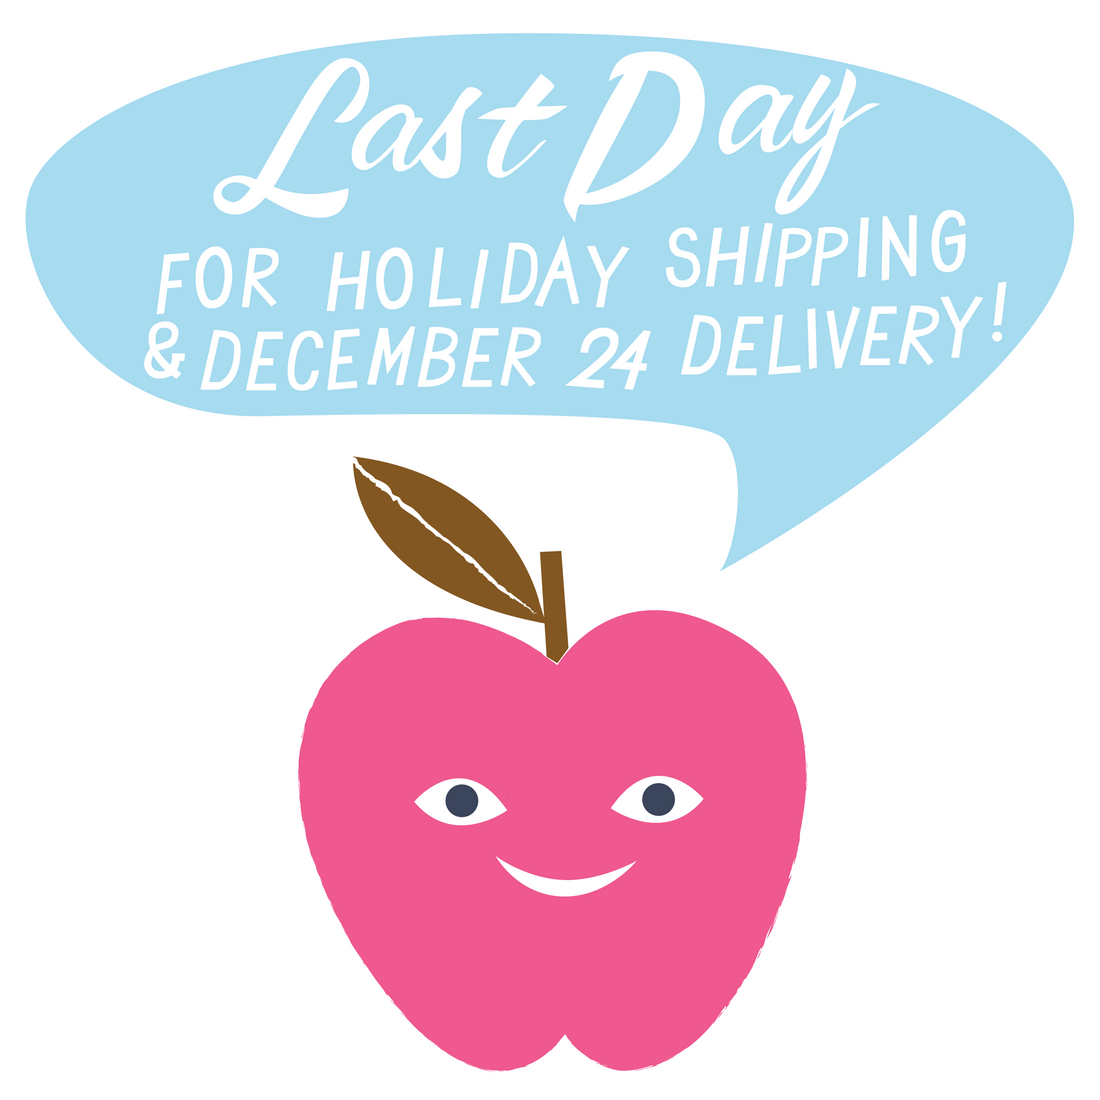 Shipping Deadlines for December 24th Delivery!